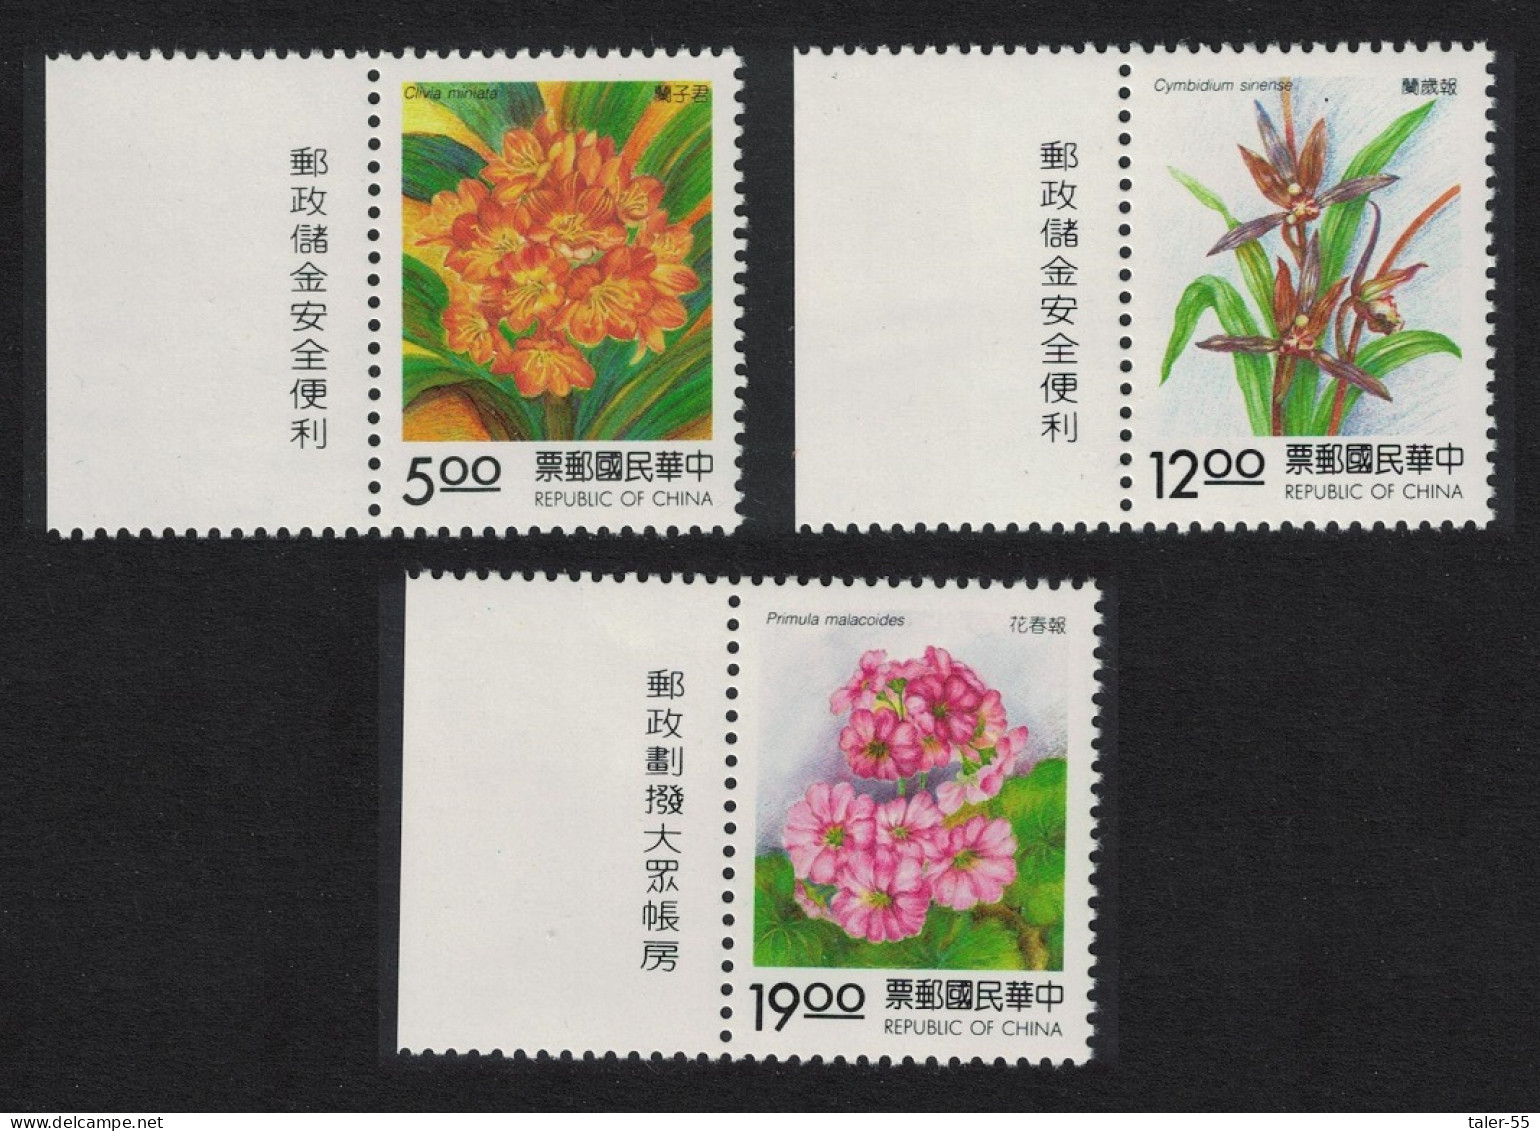 Taiwan Clivia Primula Flowers 3v Margins 1994 MNH SG#2177-2179 - Unused Stamps